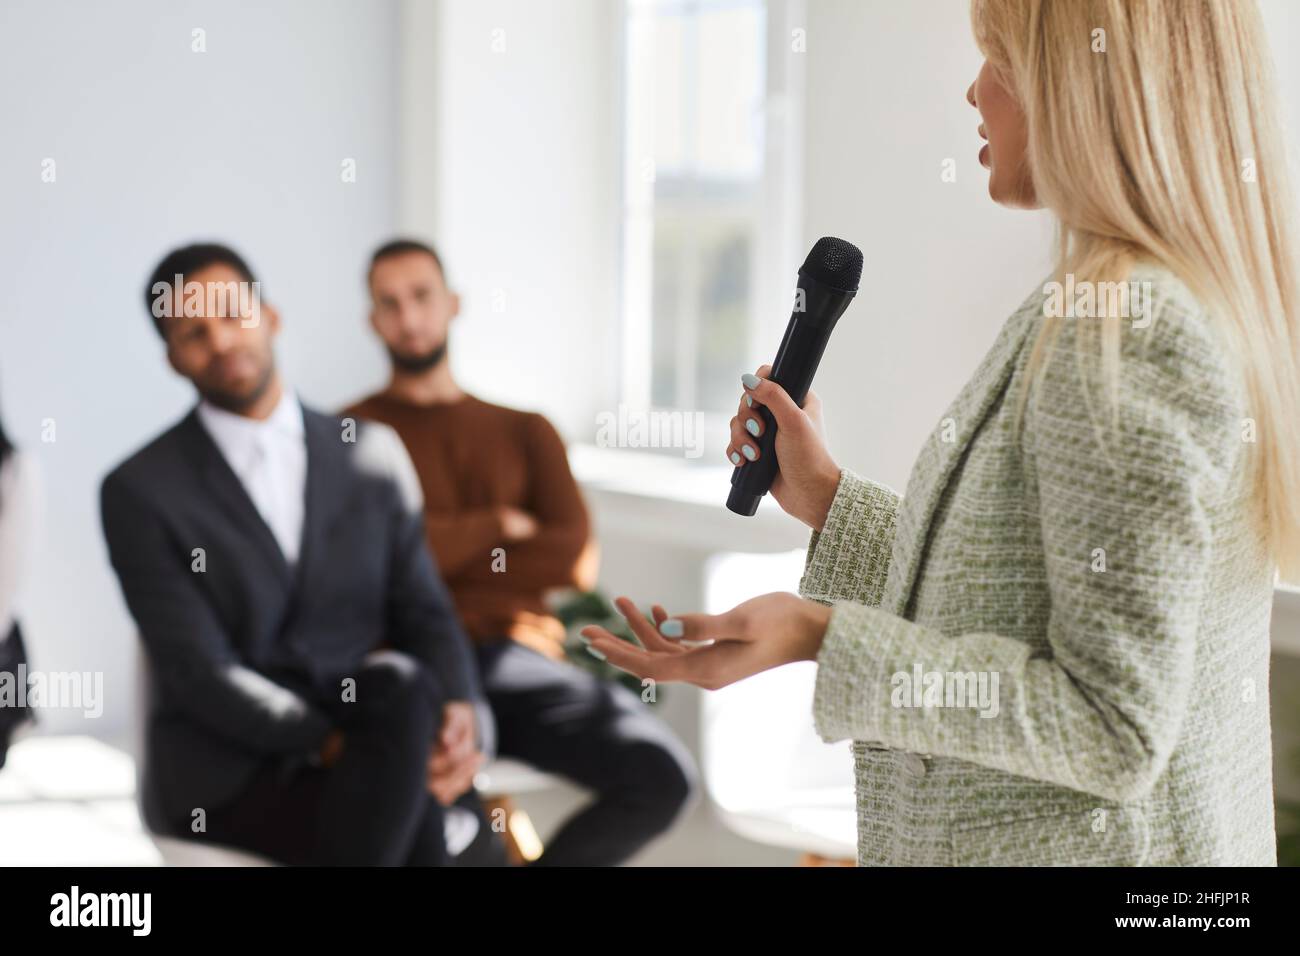 Female business speaker holding a microphone and giving a speech to a diverse audience Stock Photo